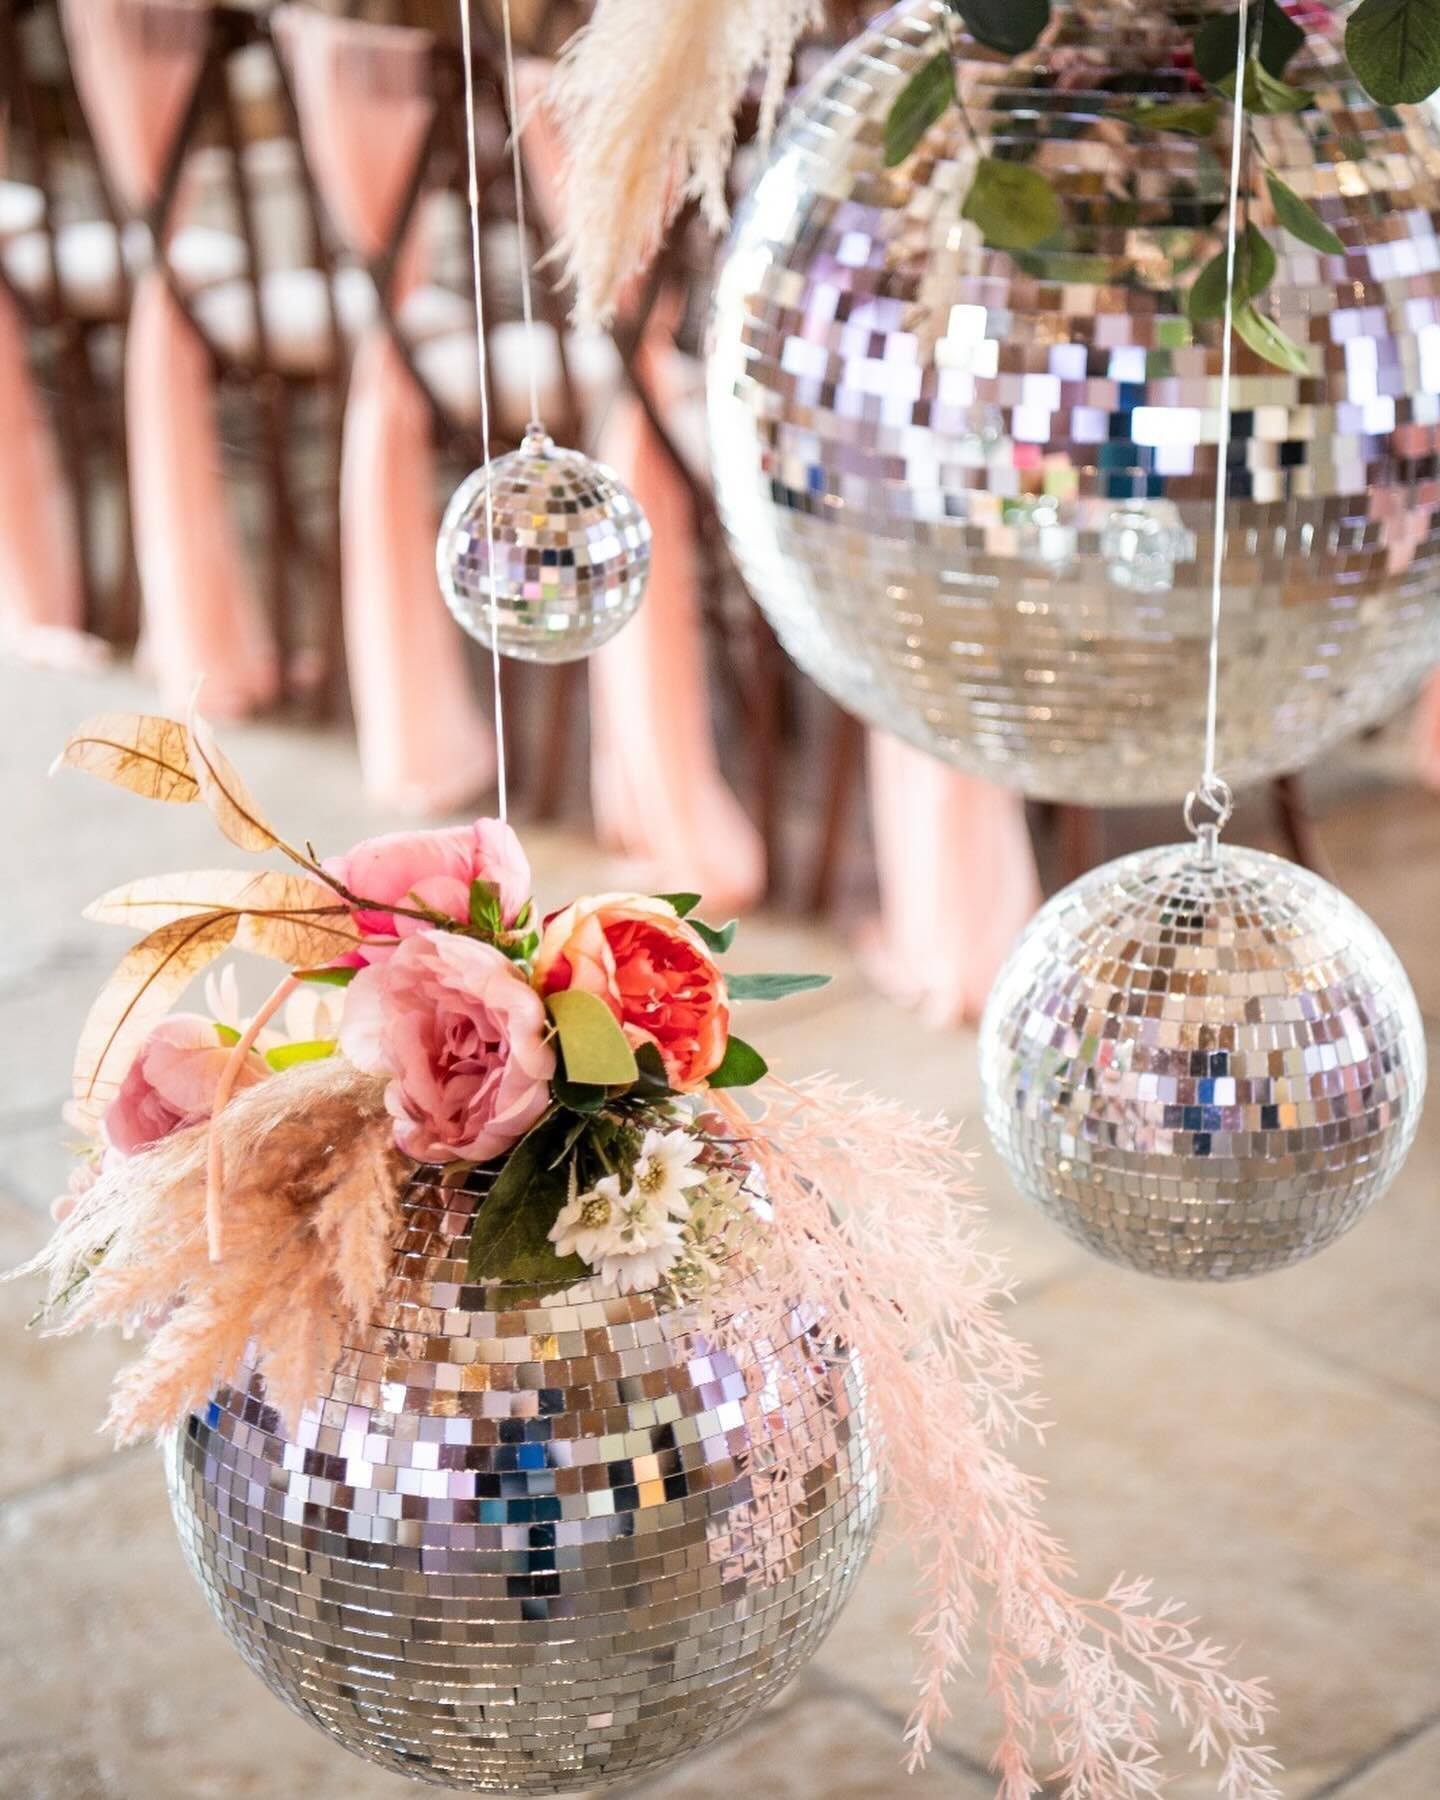 Mirror balls 🪩🪩🪩

Bring a little sparkle to your wedding or event by adding in mirror balls! We also have them in gold and black depending on your vibe. 

Styled by us recently @brookfieldbarn 

Photography by @sarahwenbanphotography 

.
.
.
.
.
.